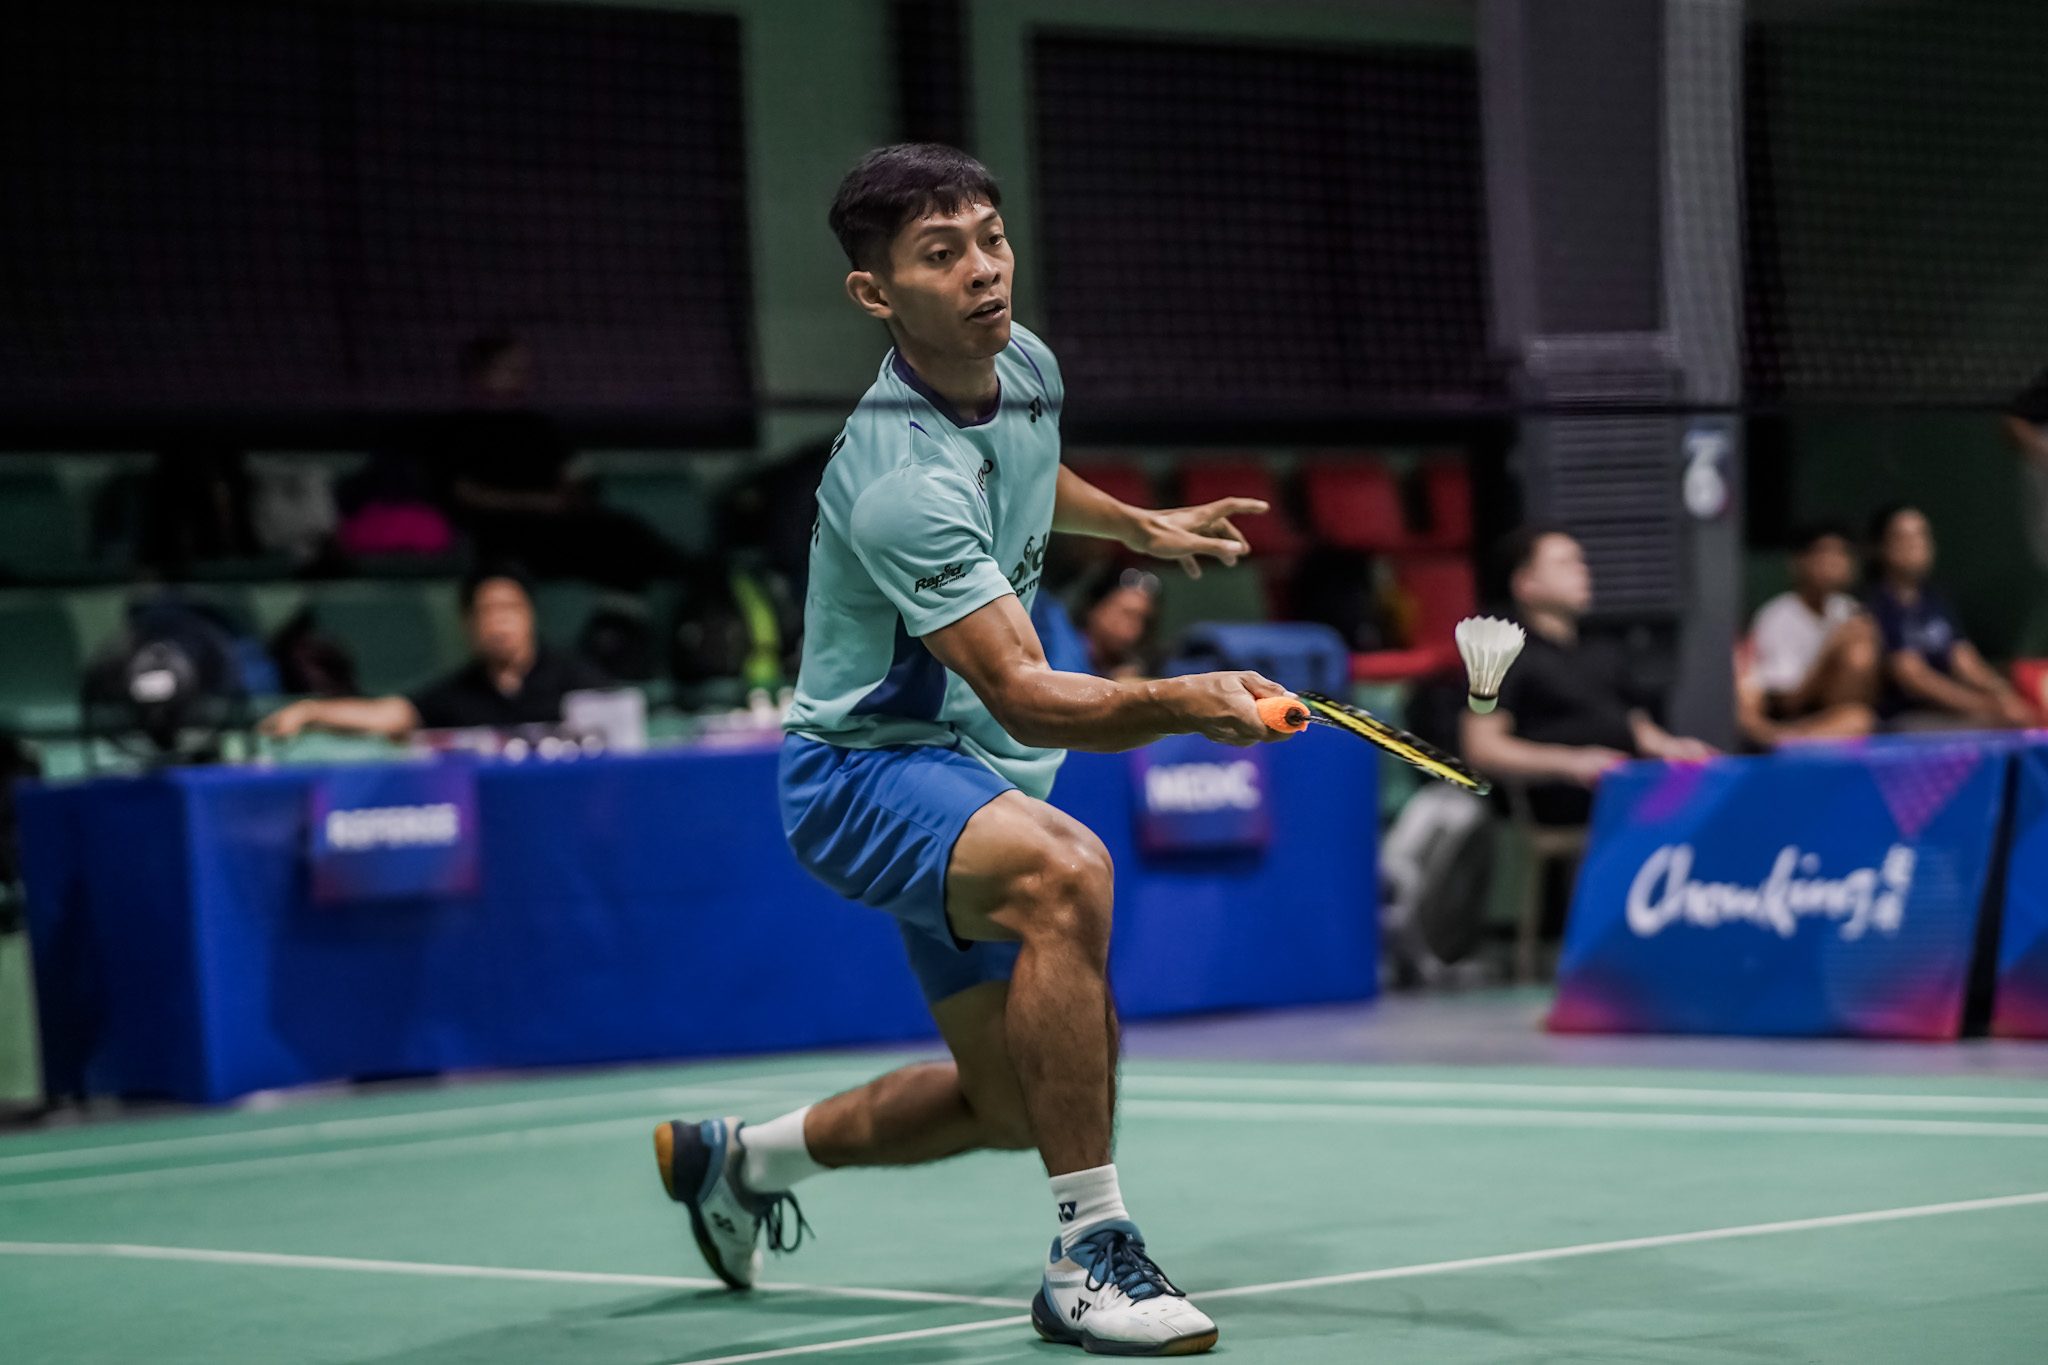 Zamboanga’s Oba-ob off to strong start in Philippine Badminton Open